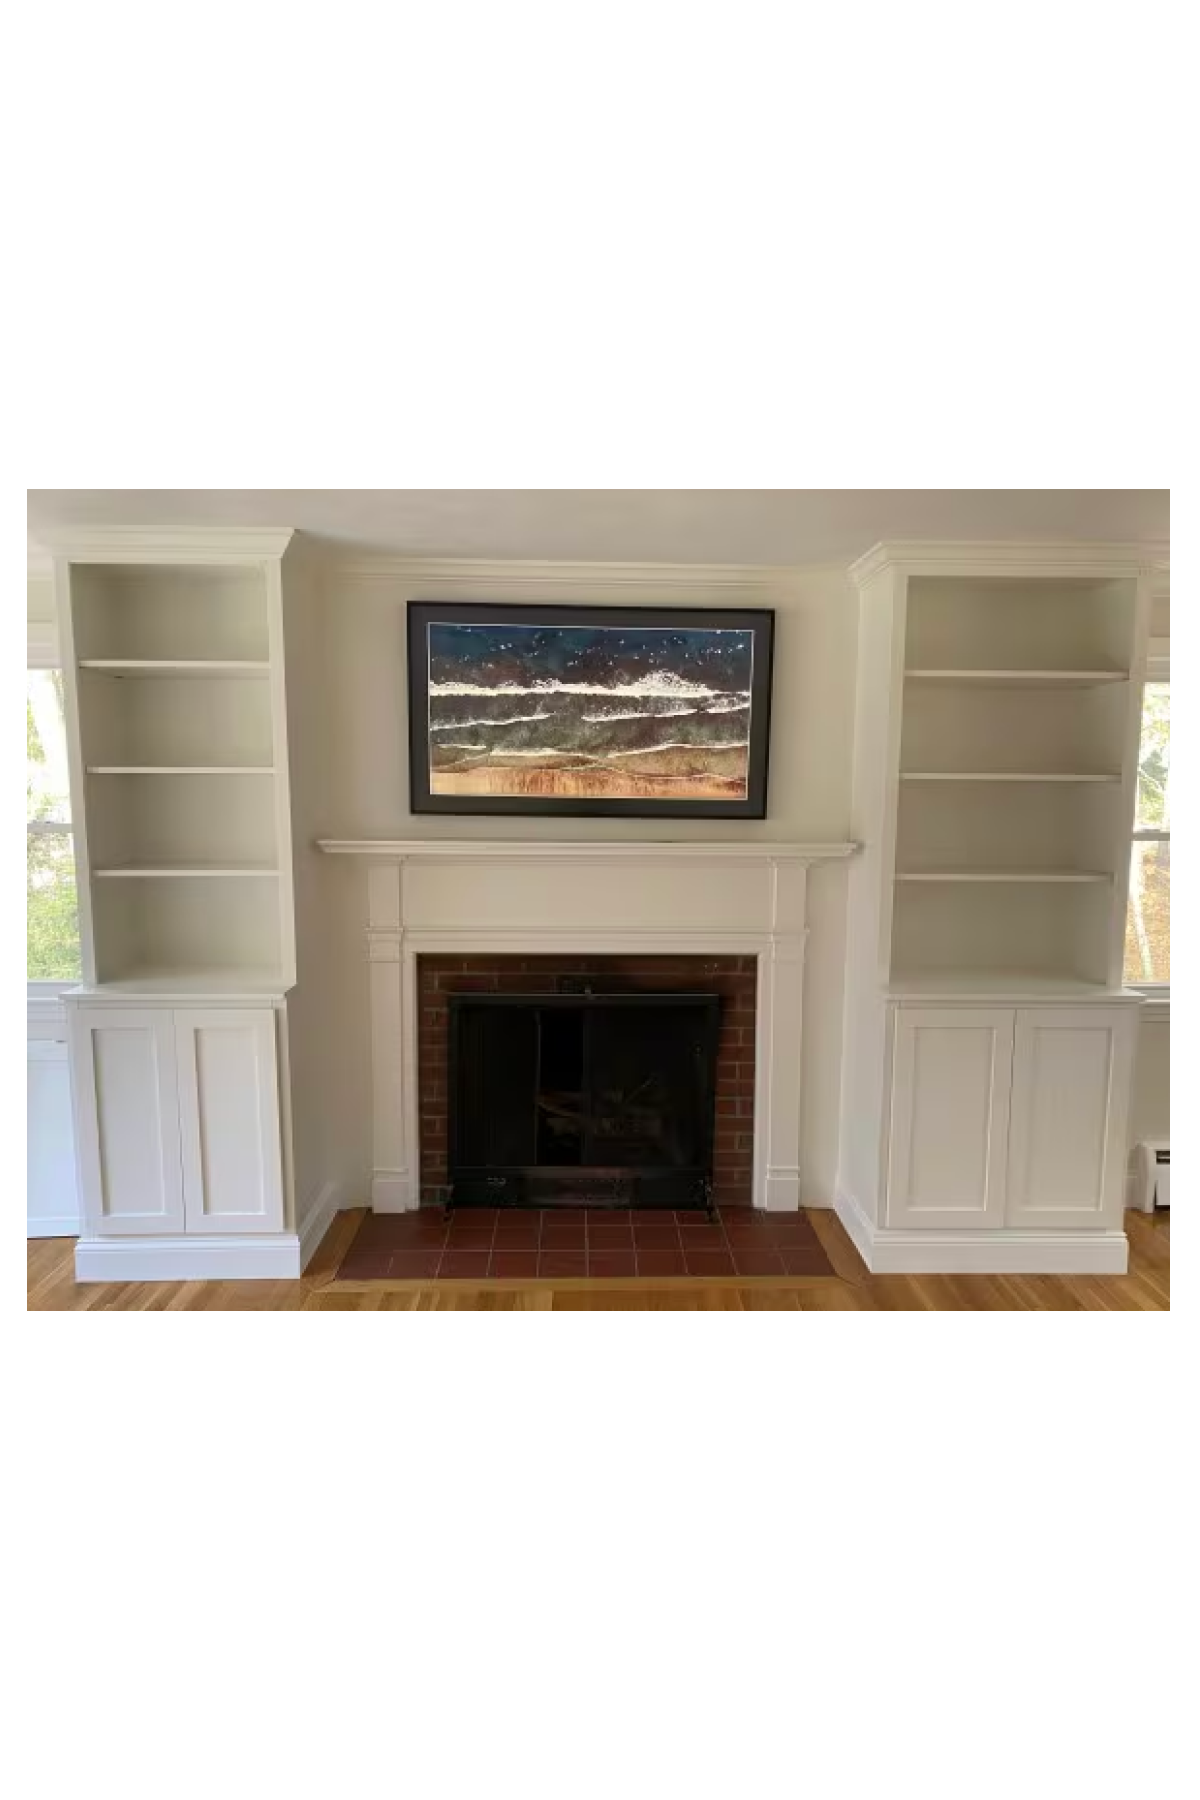 Two step back bookcase hutches built in birch painted white with doors and base molding on either side of a fireplace in someone's home.